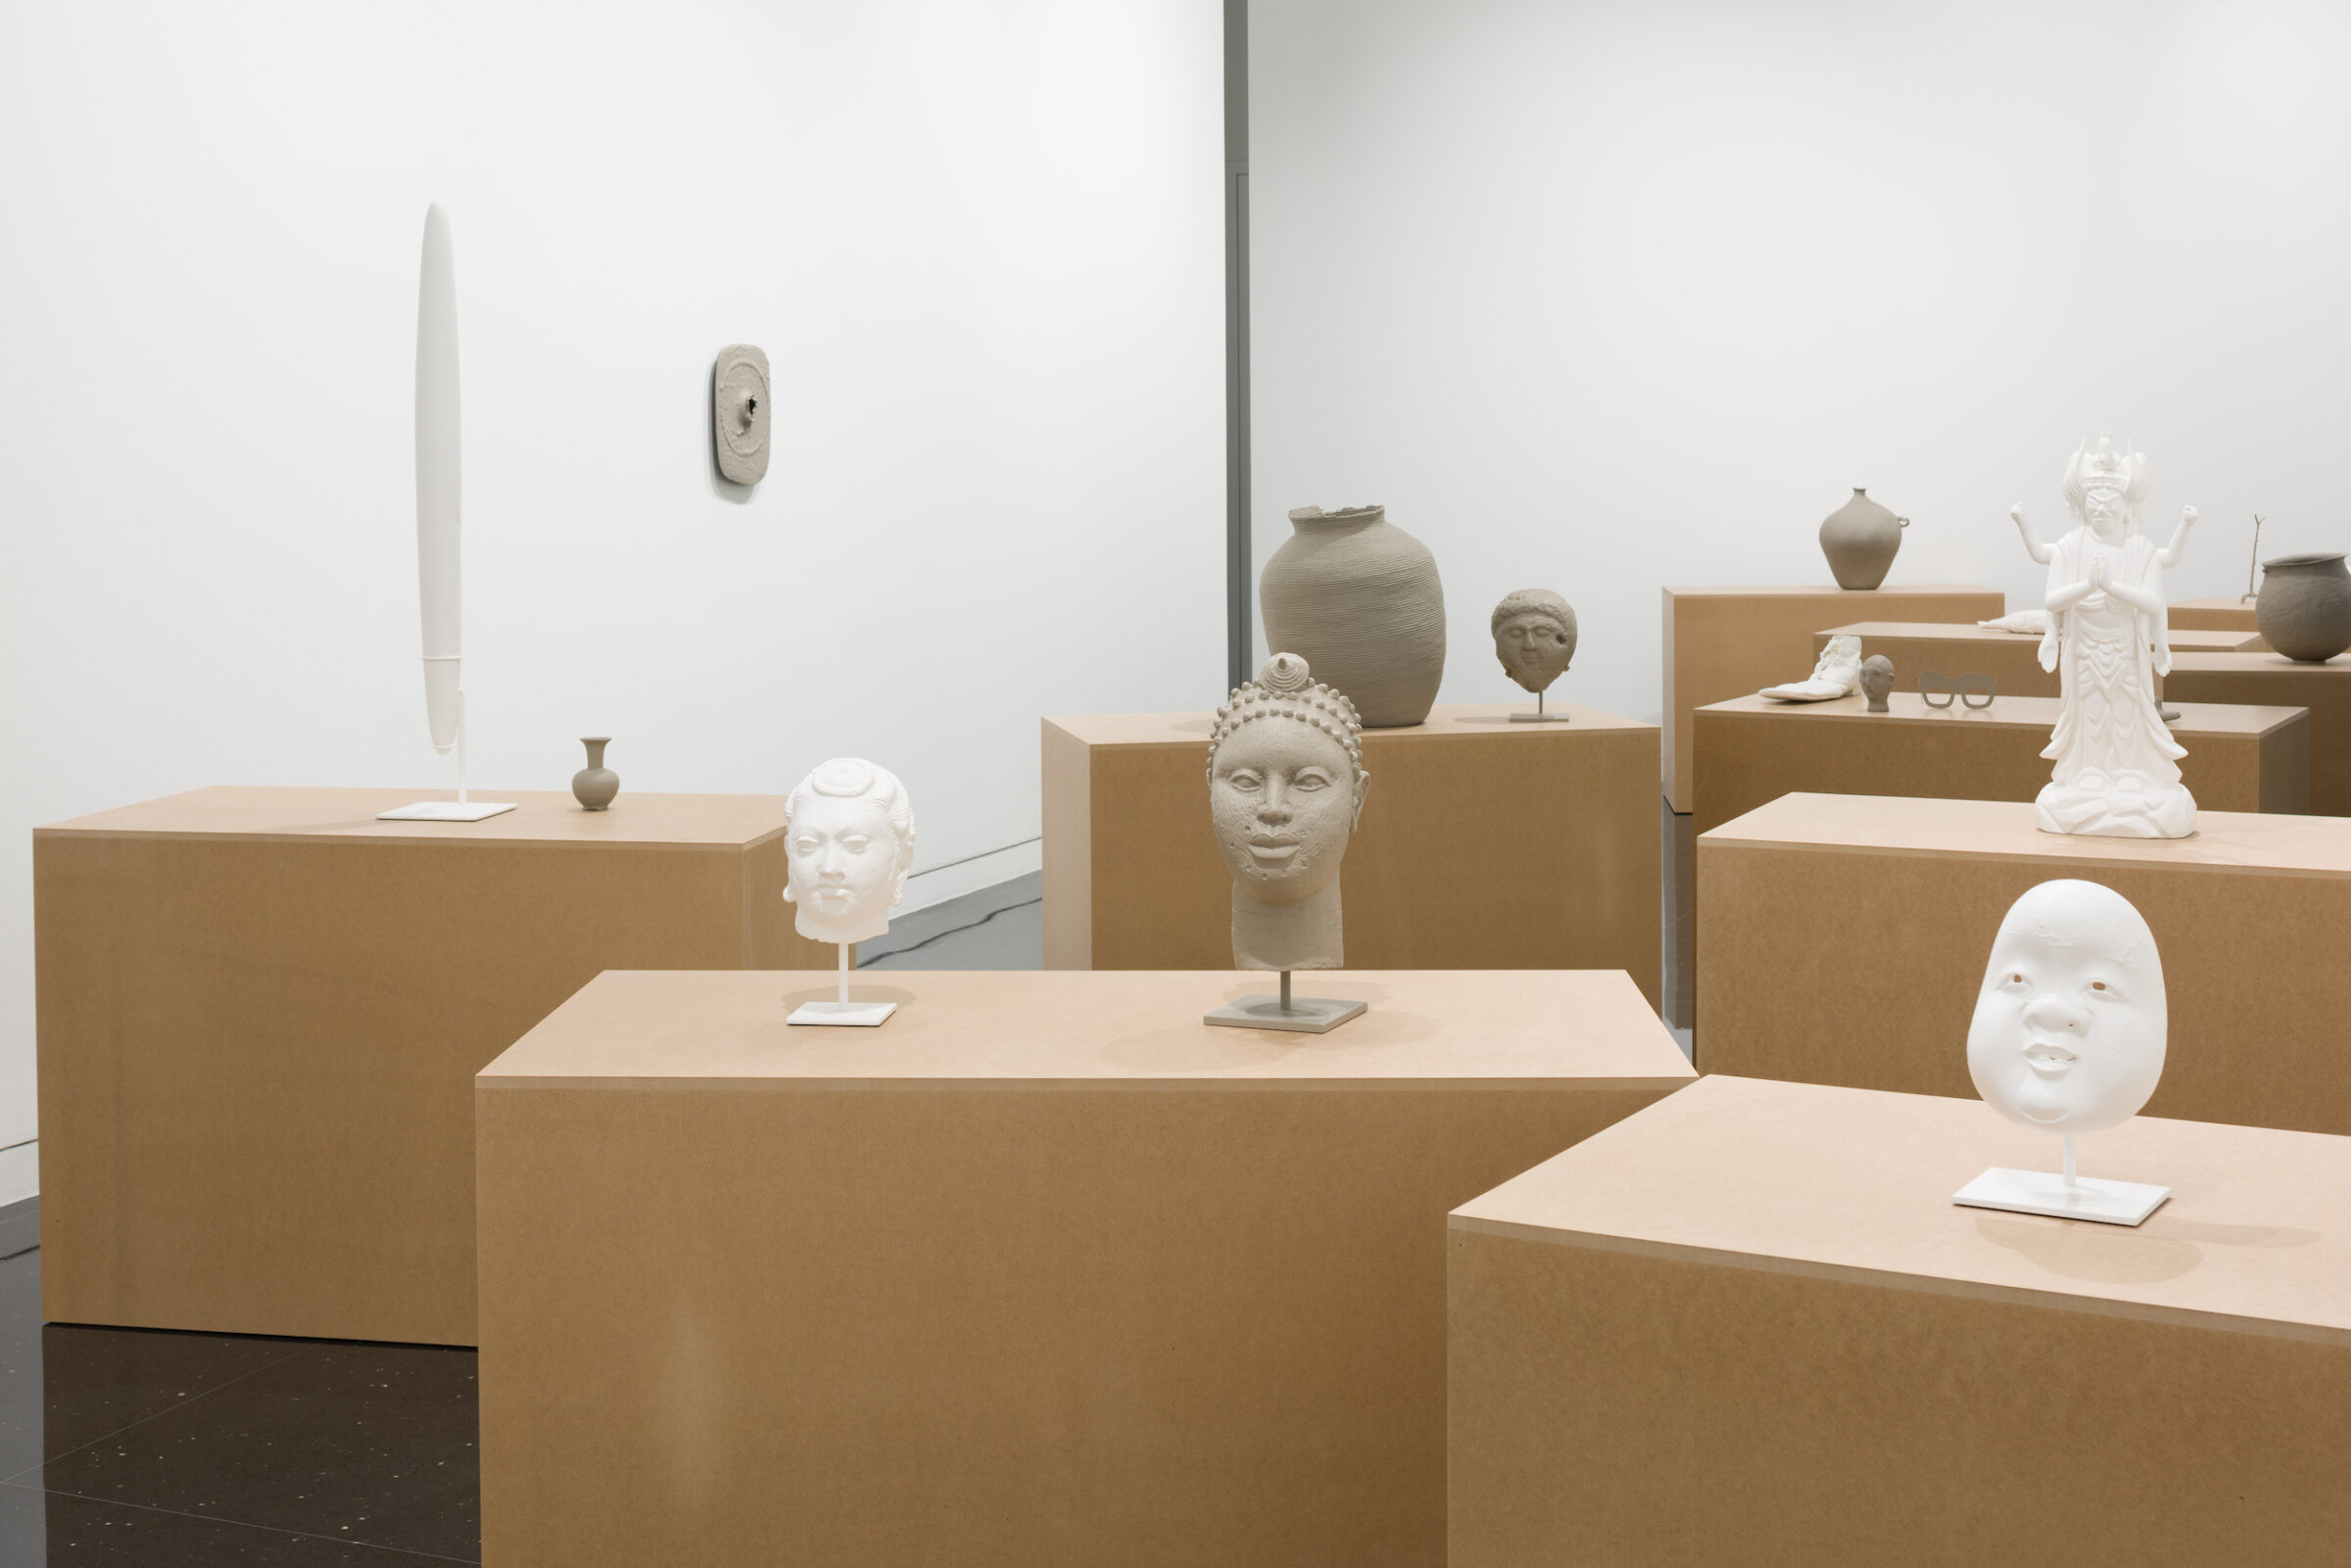 Ten pedestals resembling cardboard boxes in a white gallery space. Atop the closest pedestal are two unglazed ceramic sculptures of a mask and a head. The mask to the left of the head appears to be fired while the head appears unfired. Behind these sculptures, an unglazed and unfired jug sits on another pedestal. Several more ceramic objects appear scattered on the tops of each pedestal in the gallery.